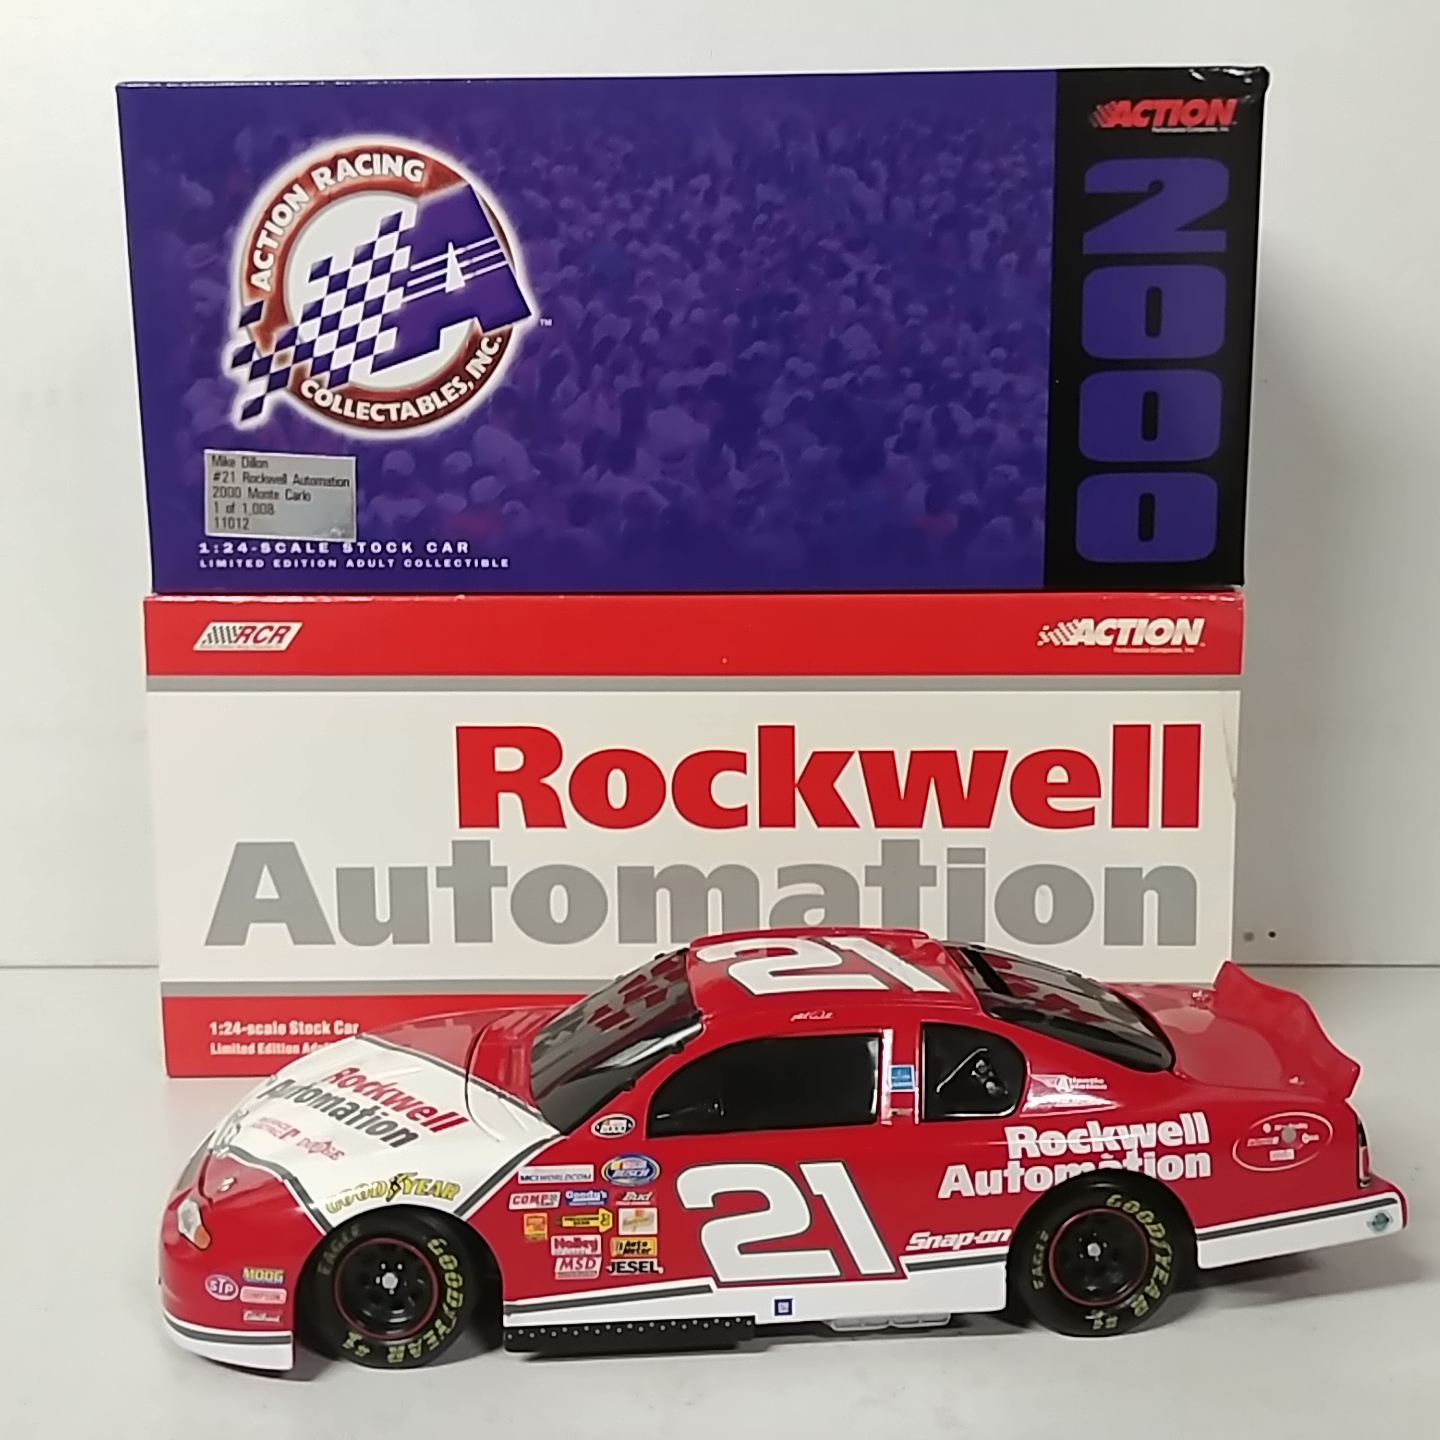 2000 Mike Dillon 1/24th Rockwell Automation "Busch Series" b/w bank